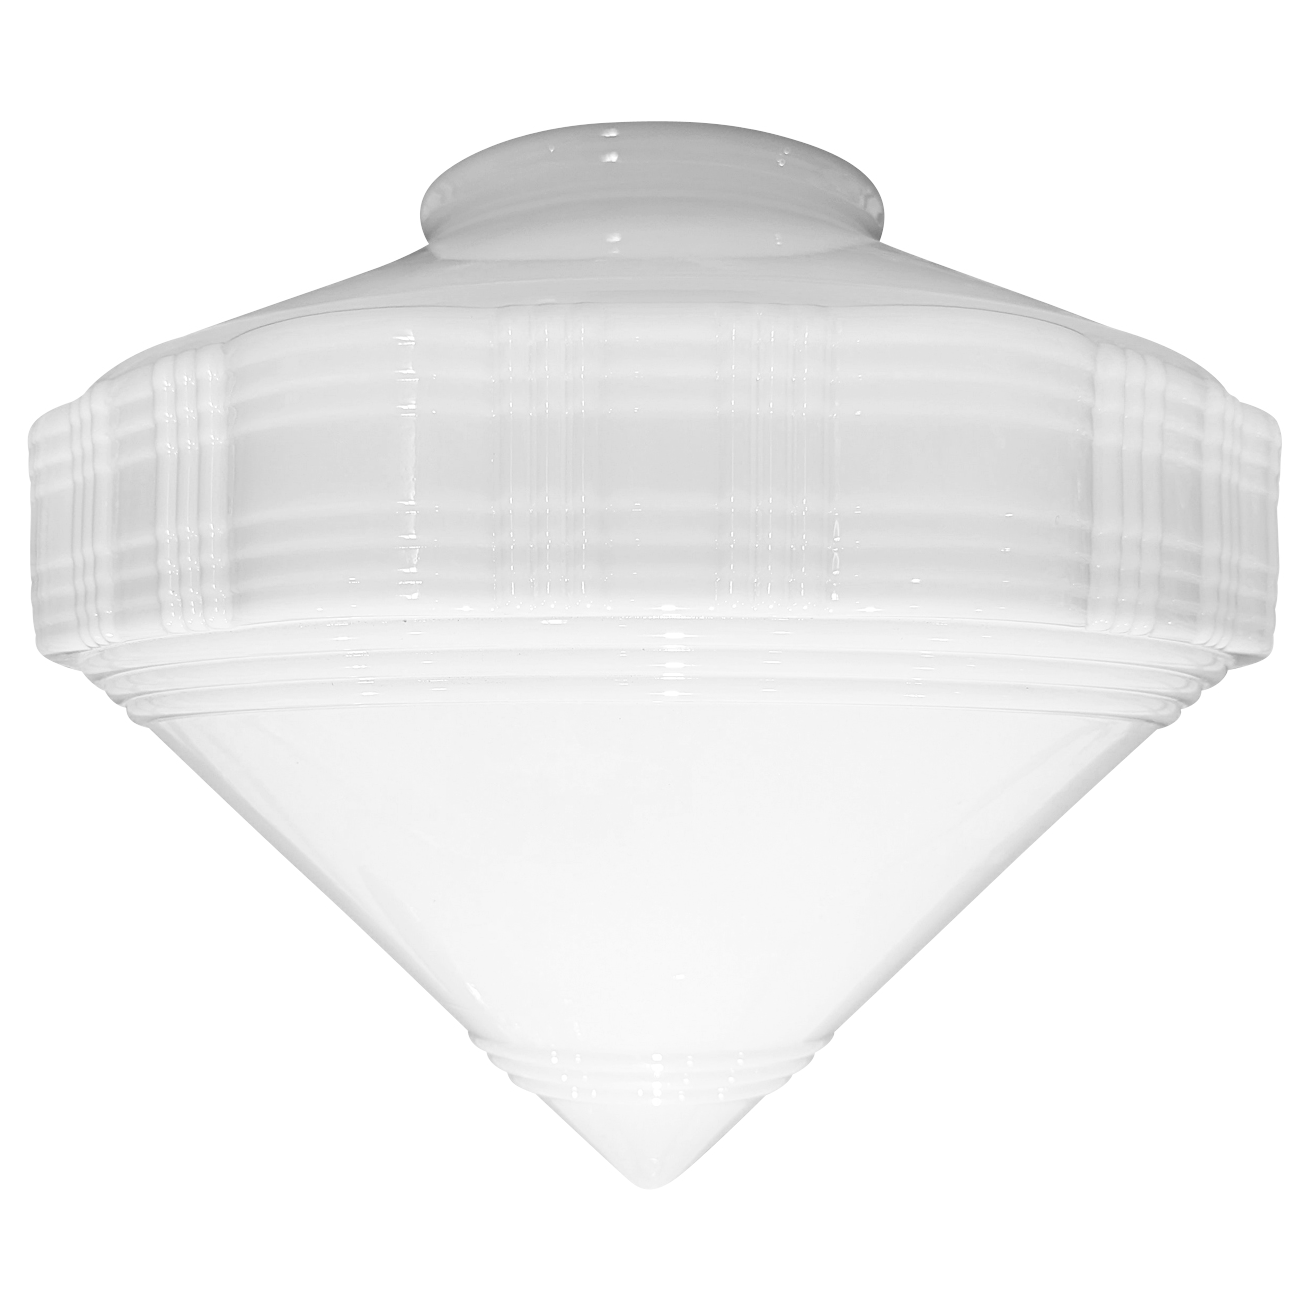 15 Inch Art Deco Style Milk Glass Light Shade (6 Inch Fitter)